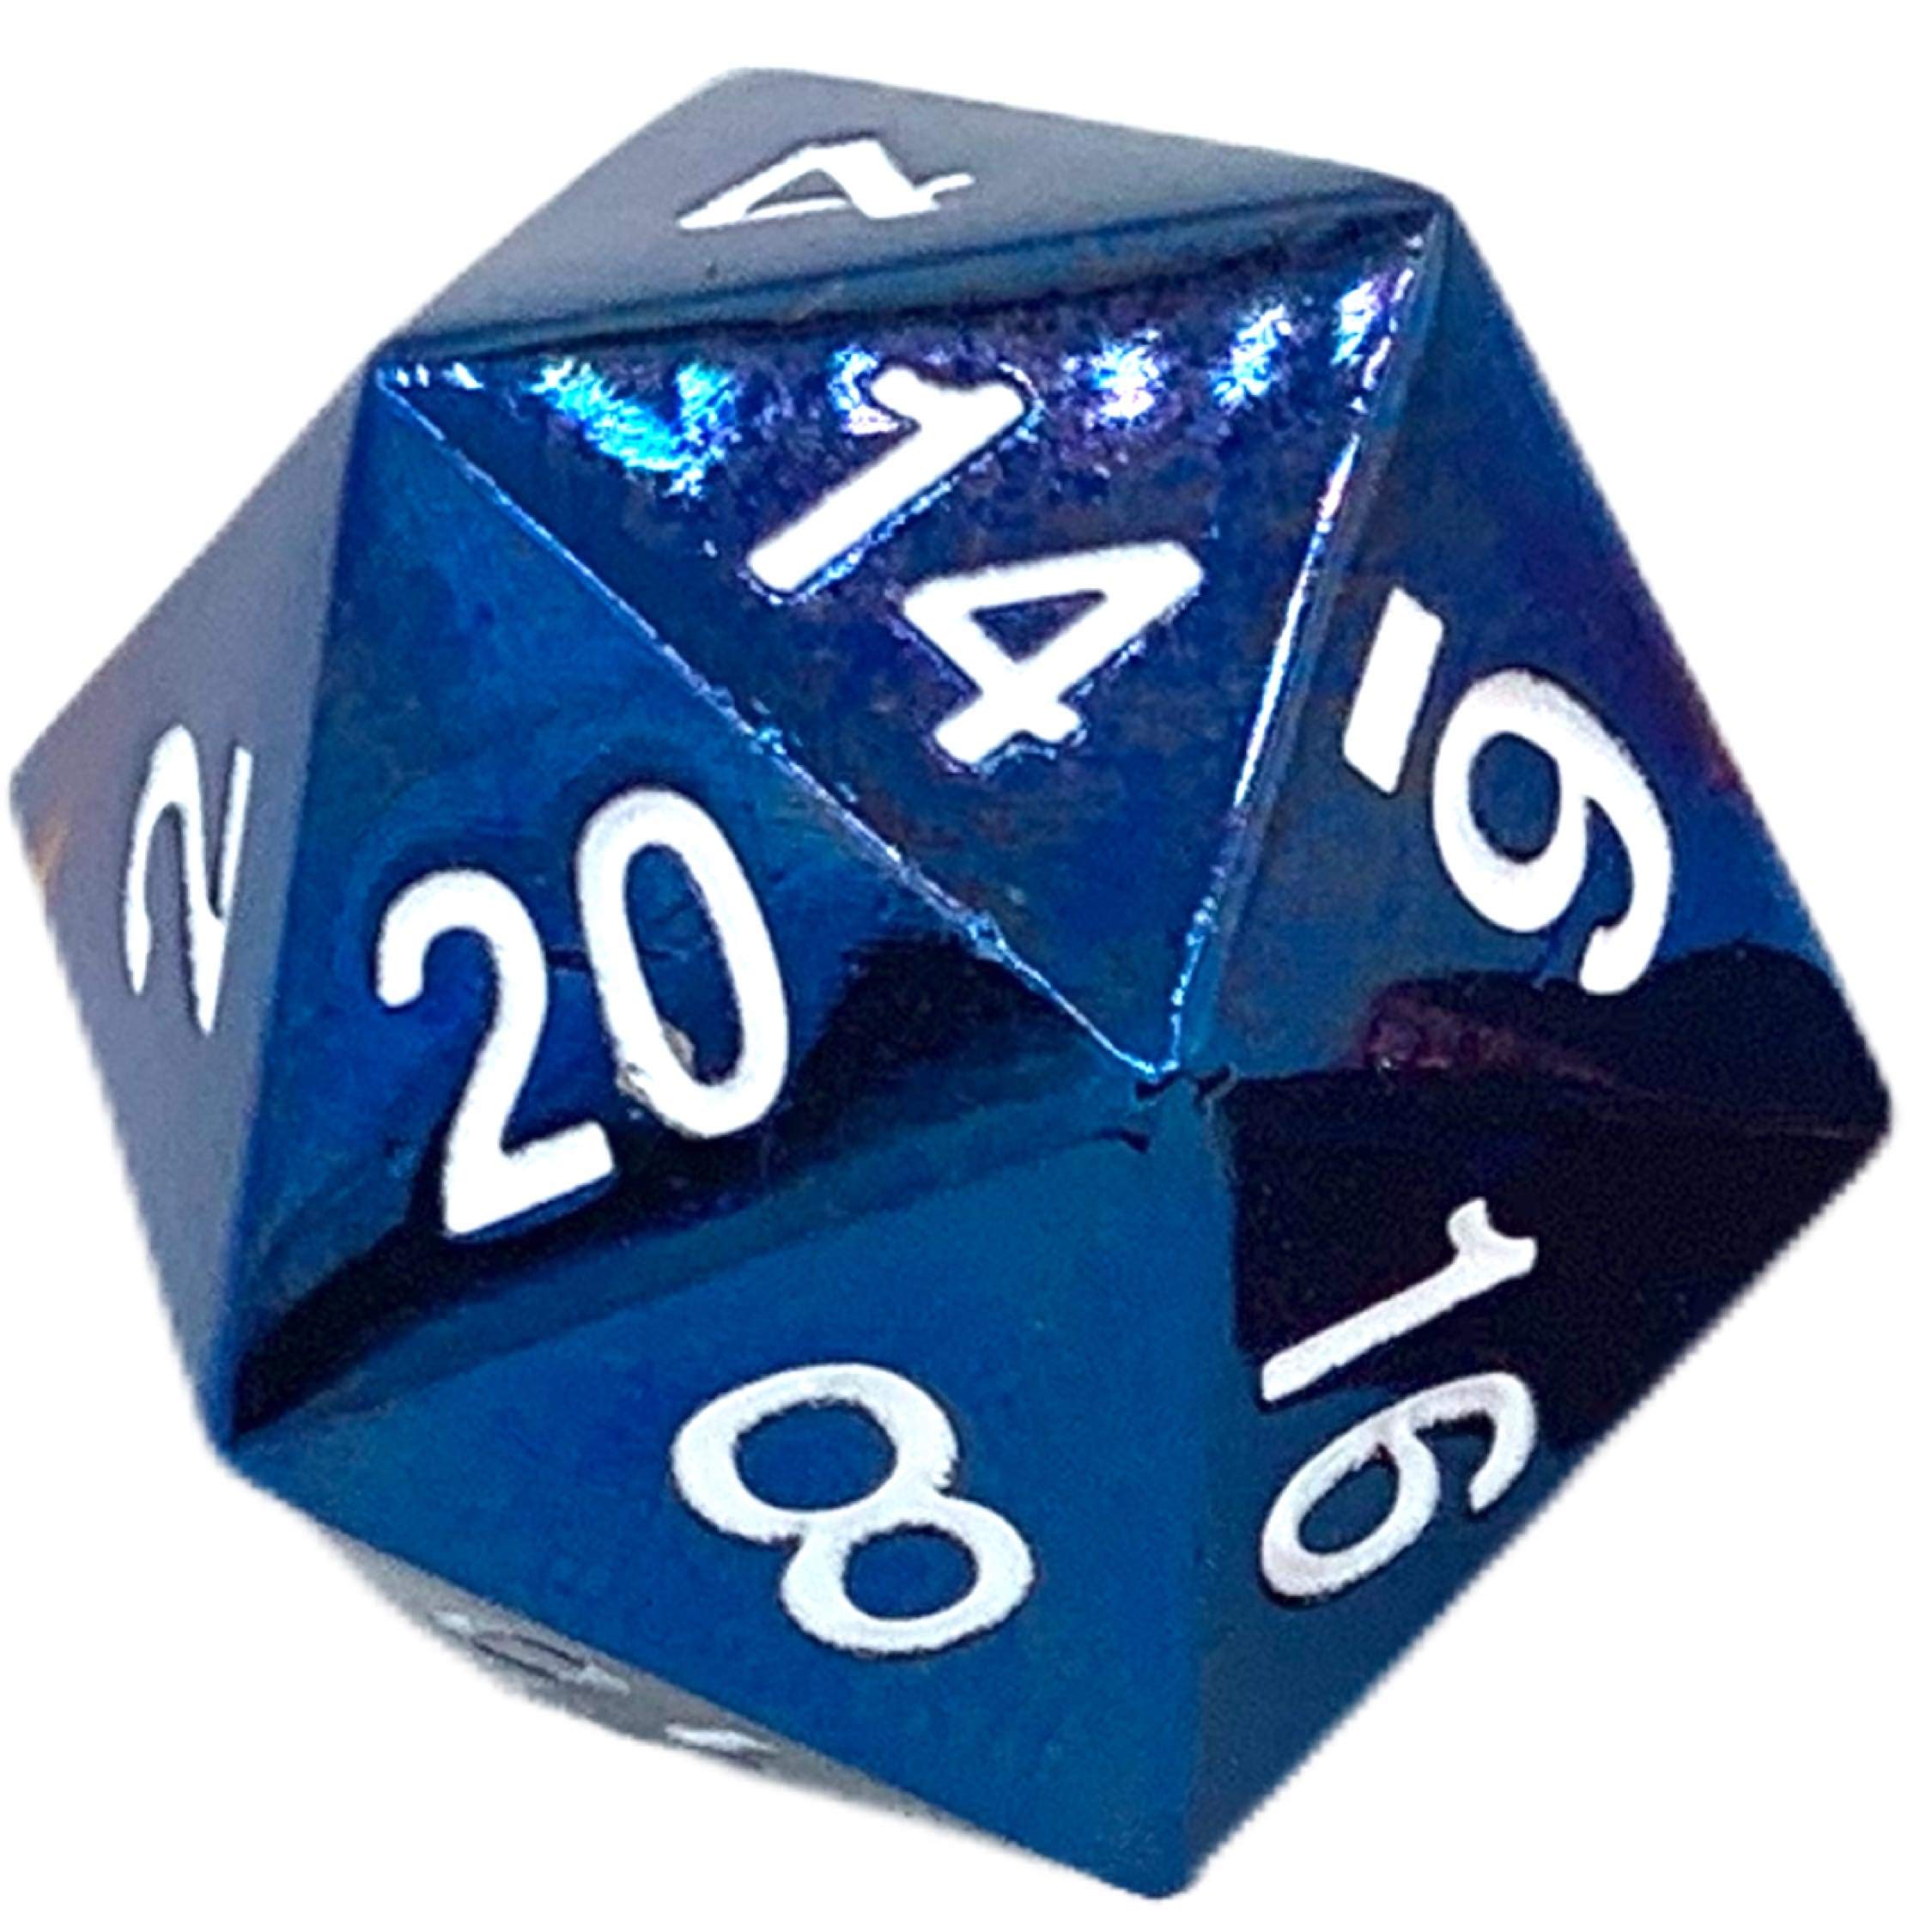 A blue 20-sided dice on a white background